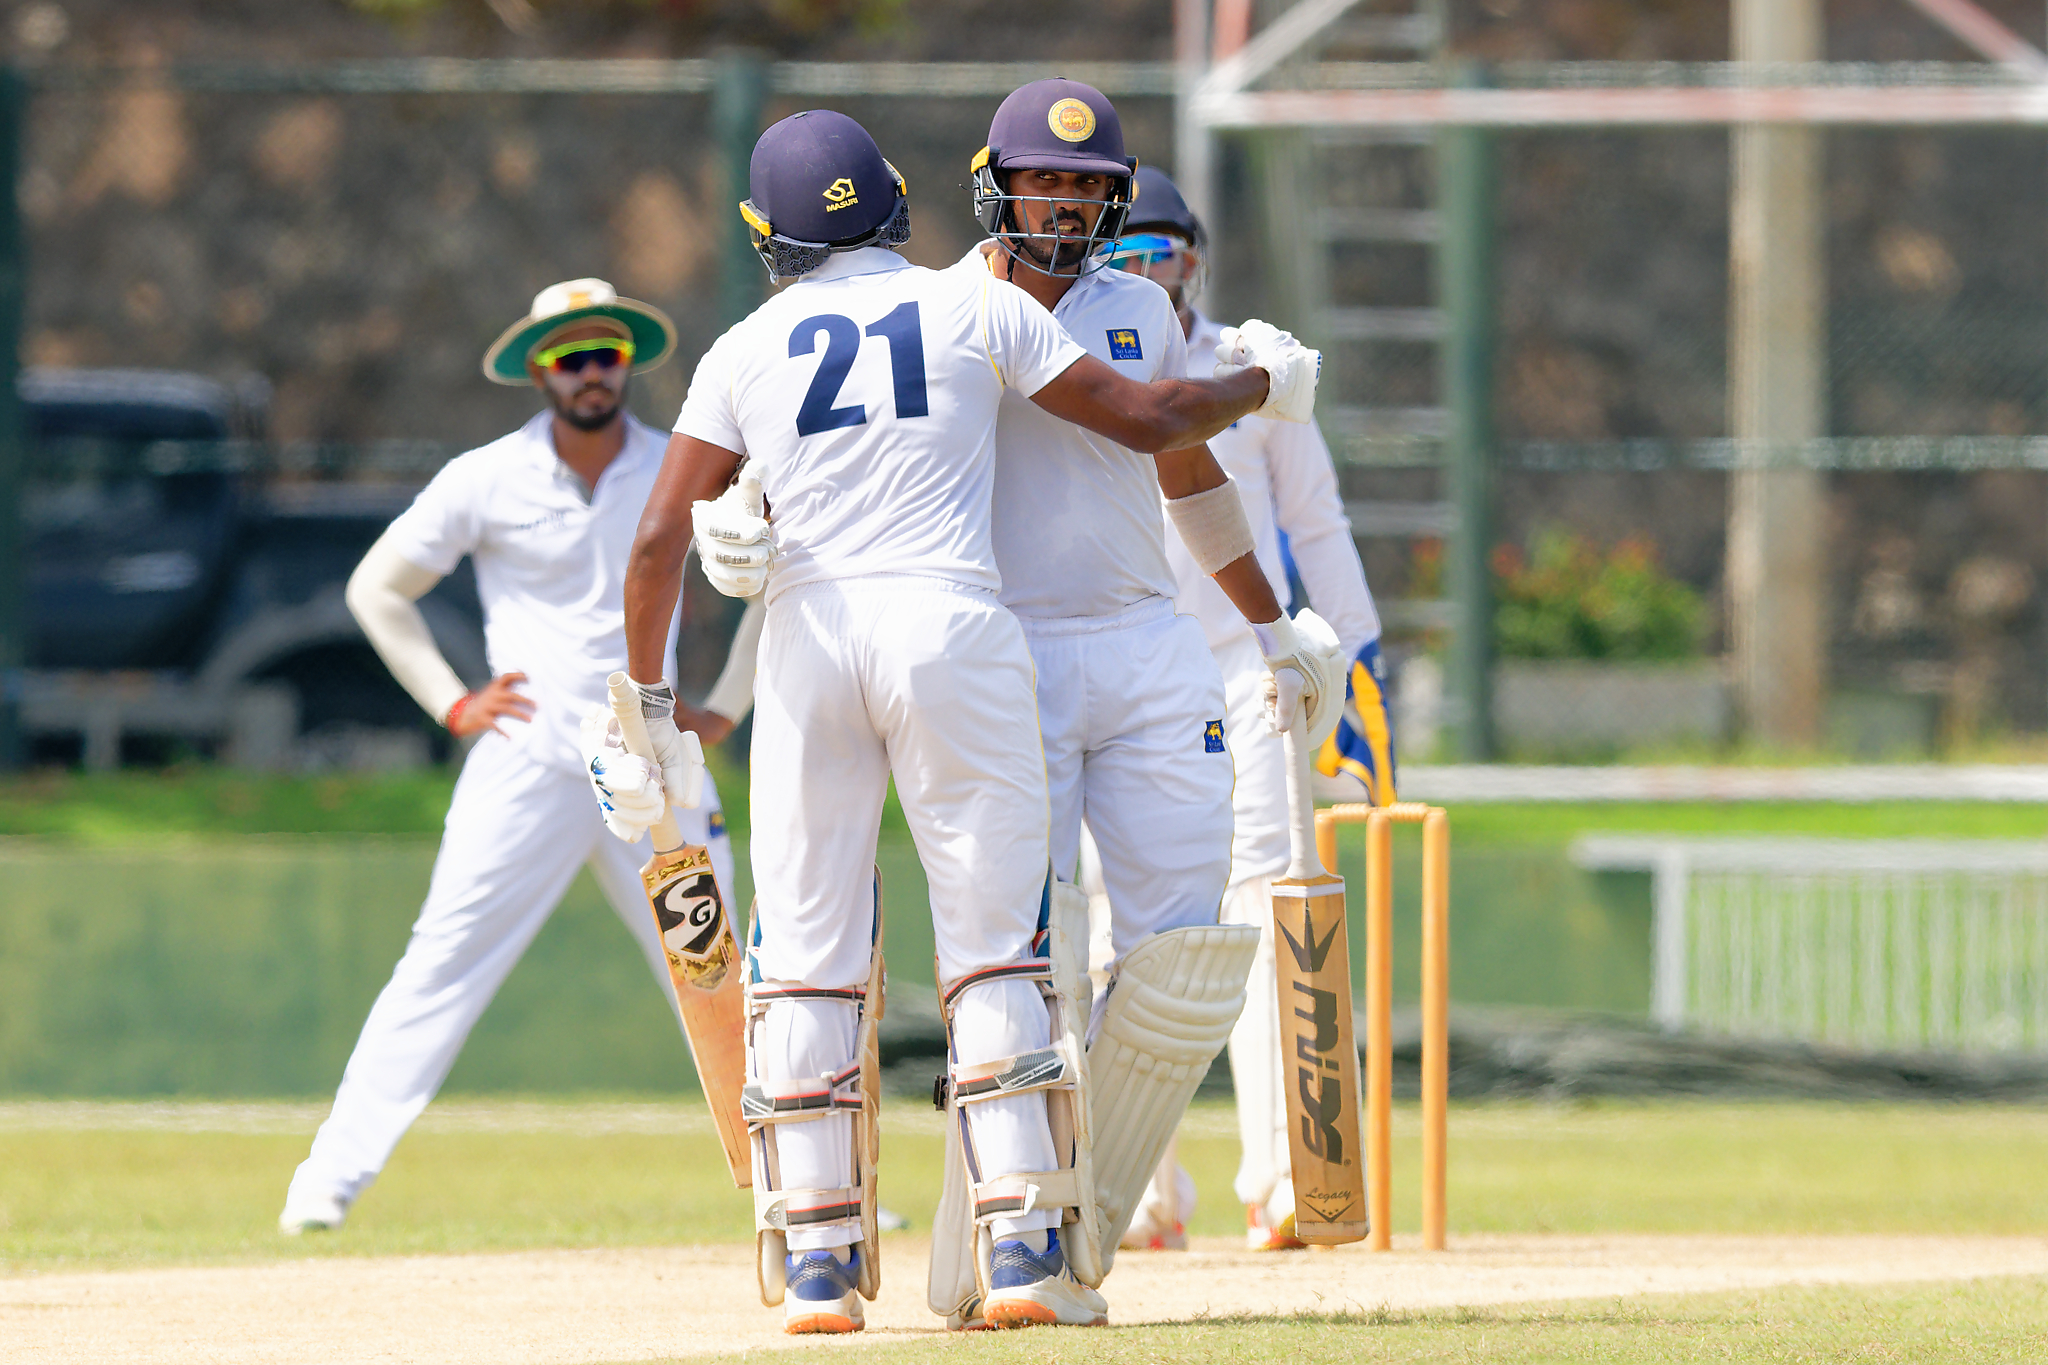 Kandy on course to trophy glitter – Dismiss Jaffna for 227 – lead by 169 with 9 second innings wkts intact